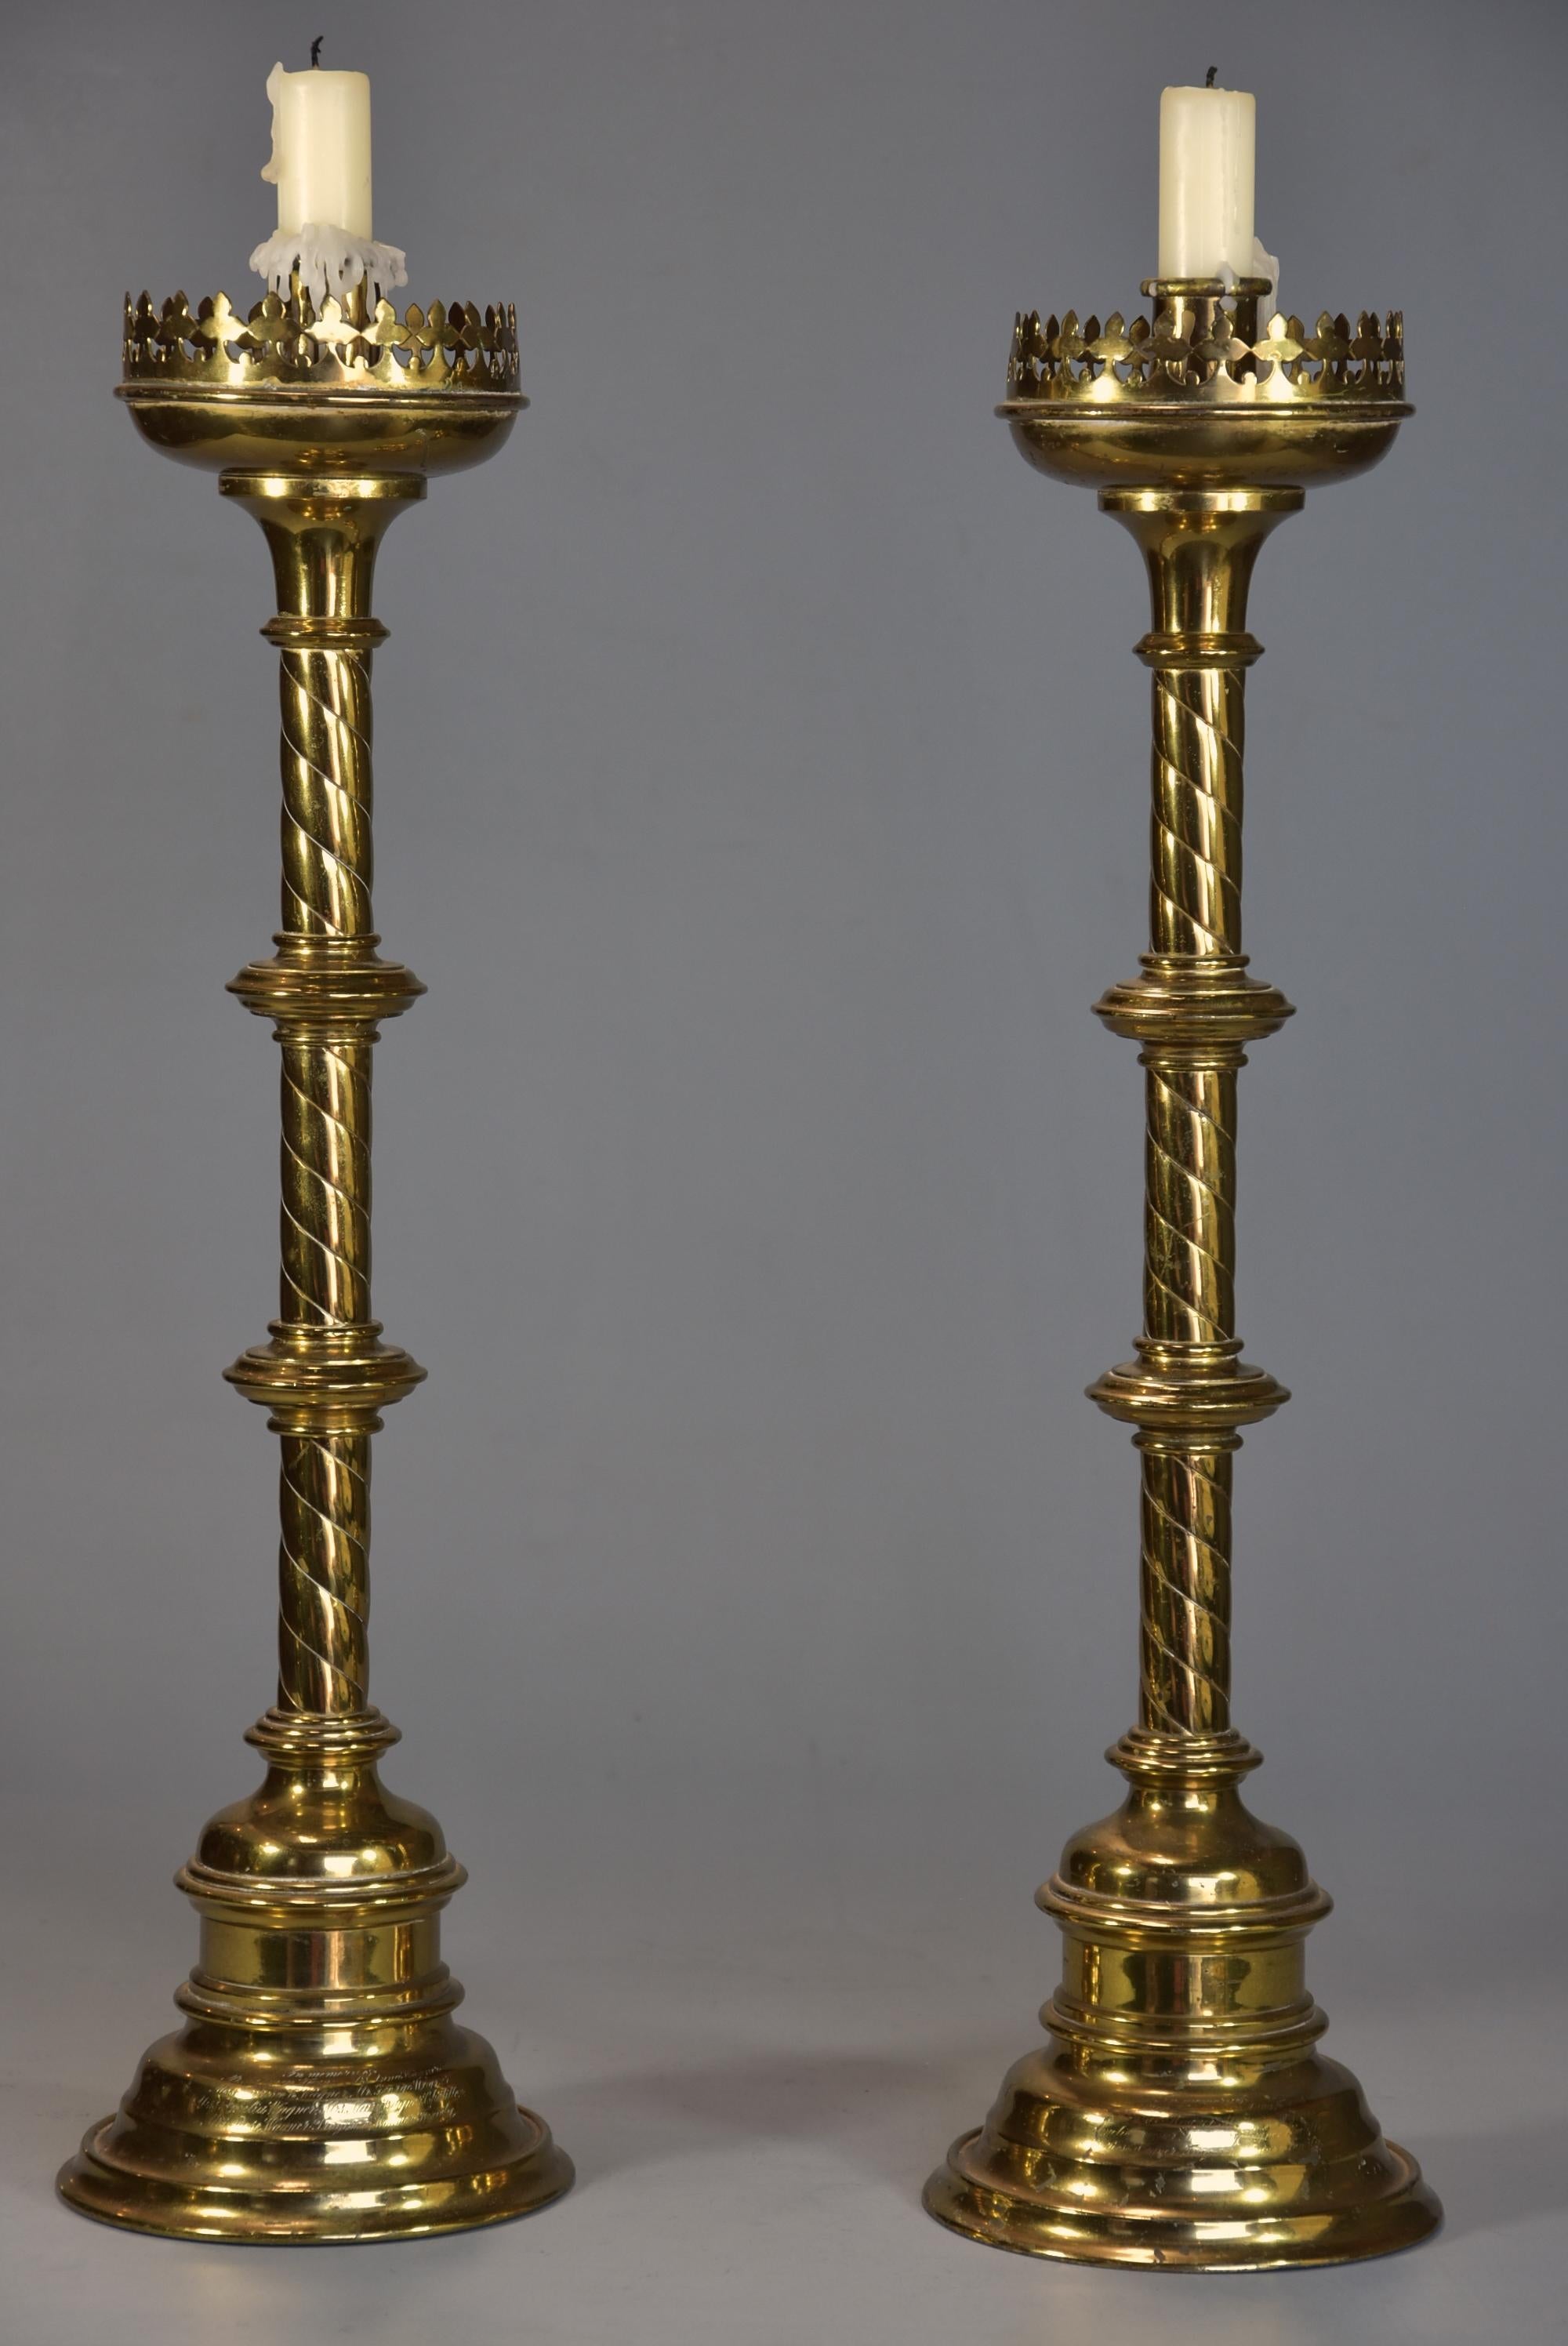 English Pair of Highly Decorative Late 19th Century Gothic Style Brass Candlesticks